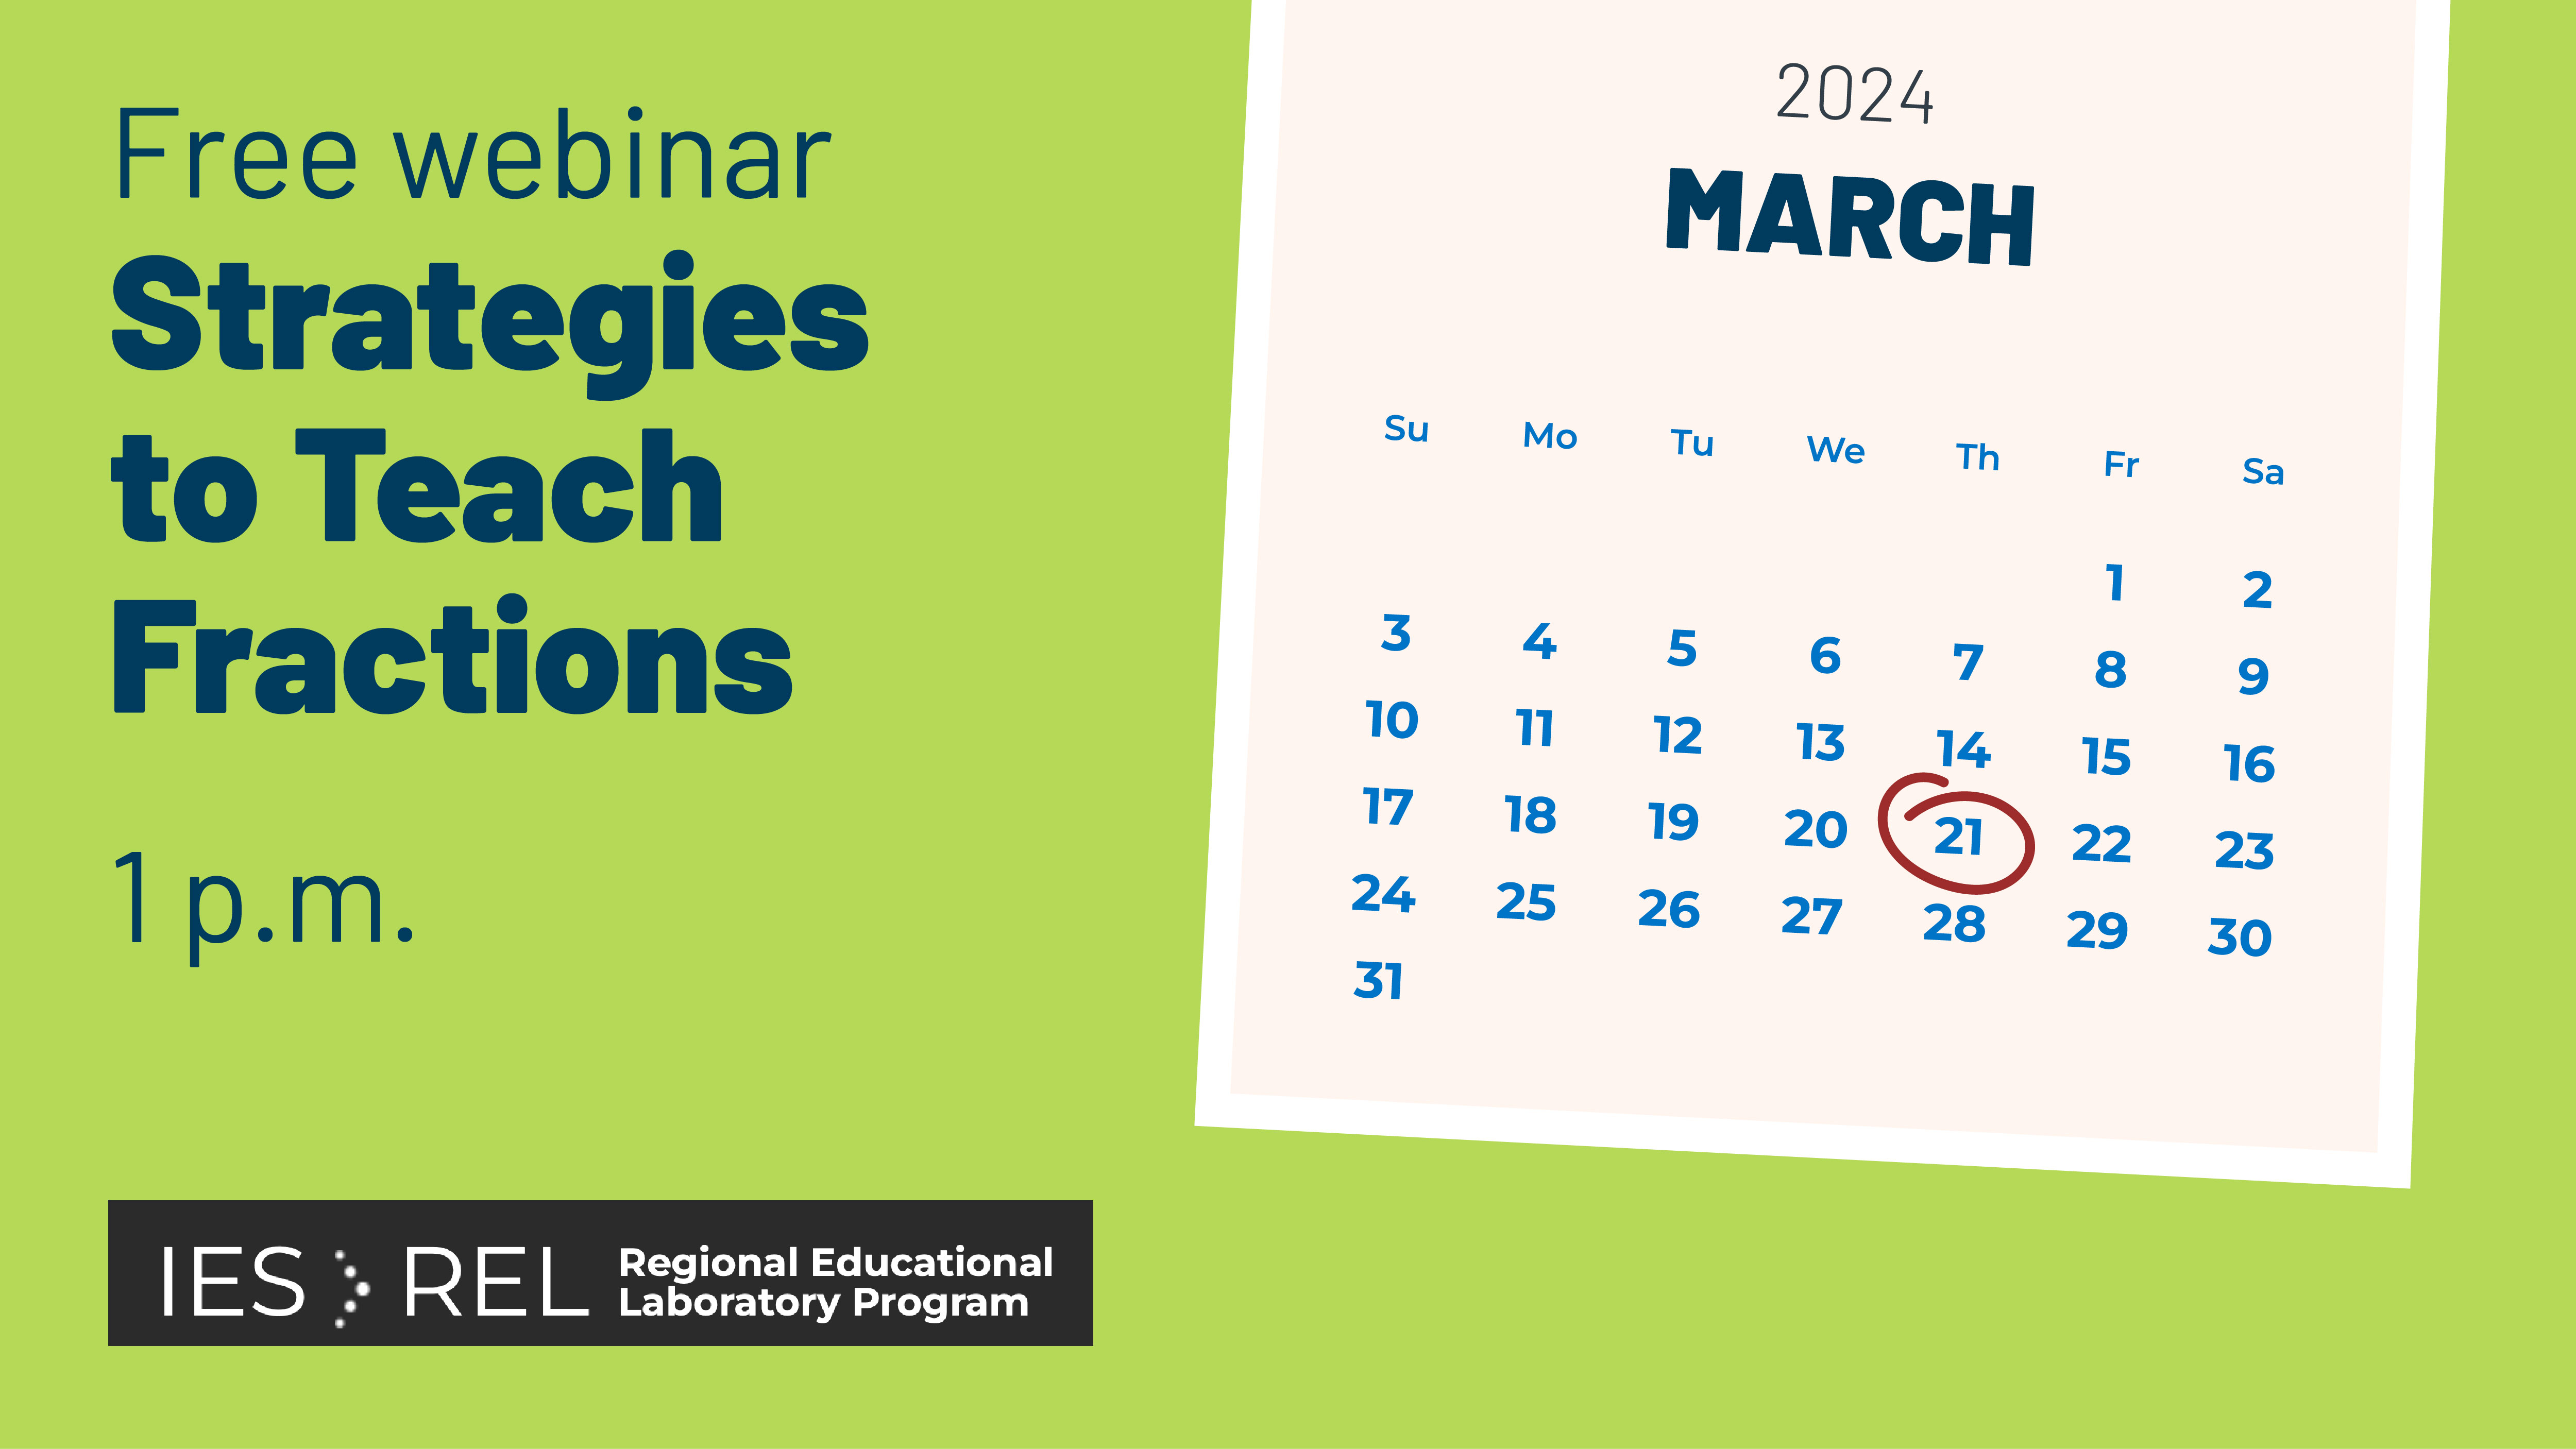 Free webinar Strategies to Teach Fractions at 1p.m. on March 21. Graphic of calendar with date circled.